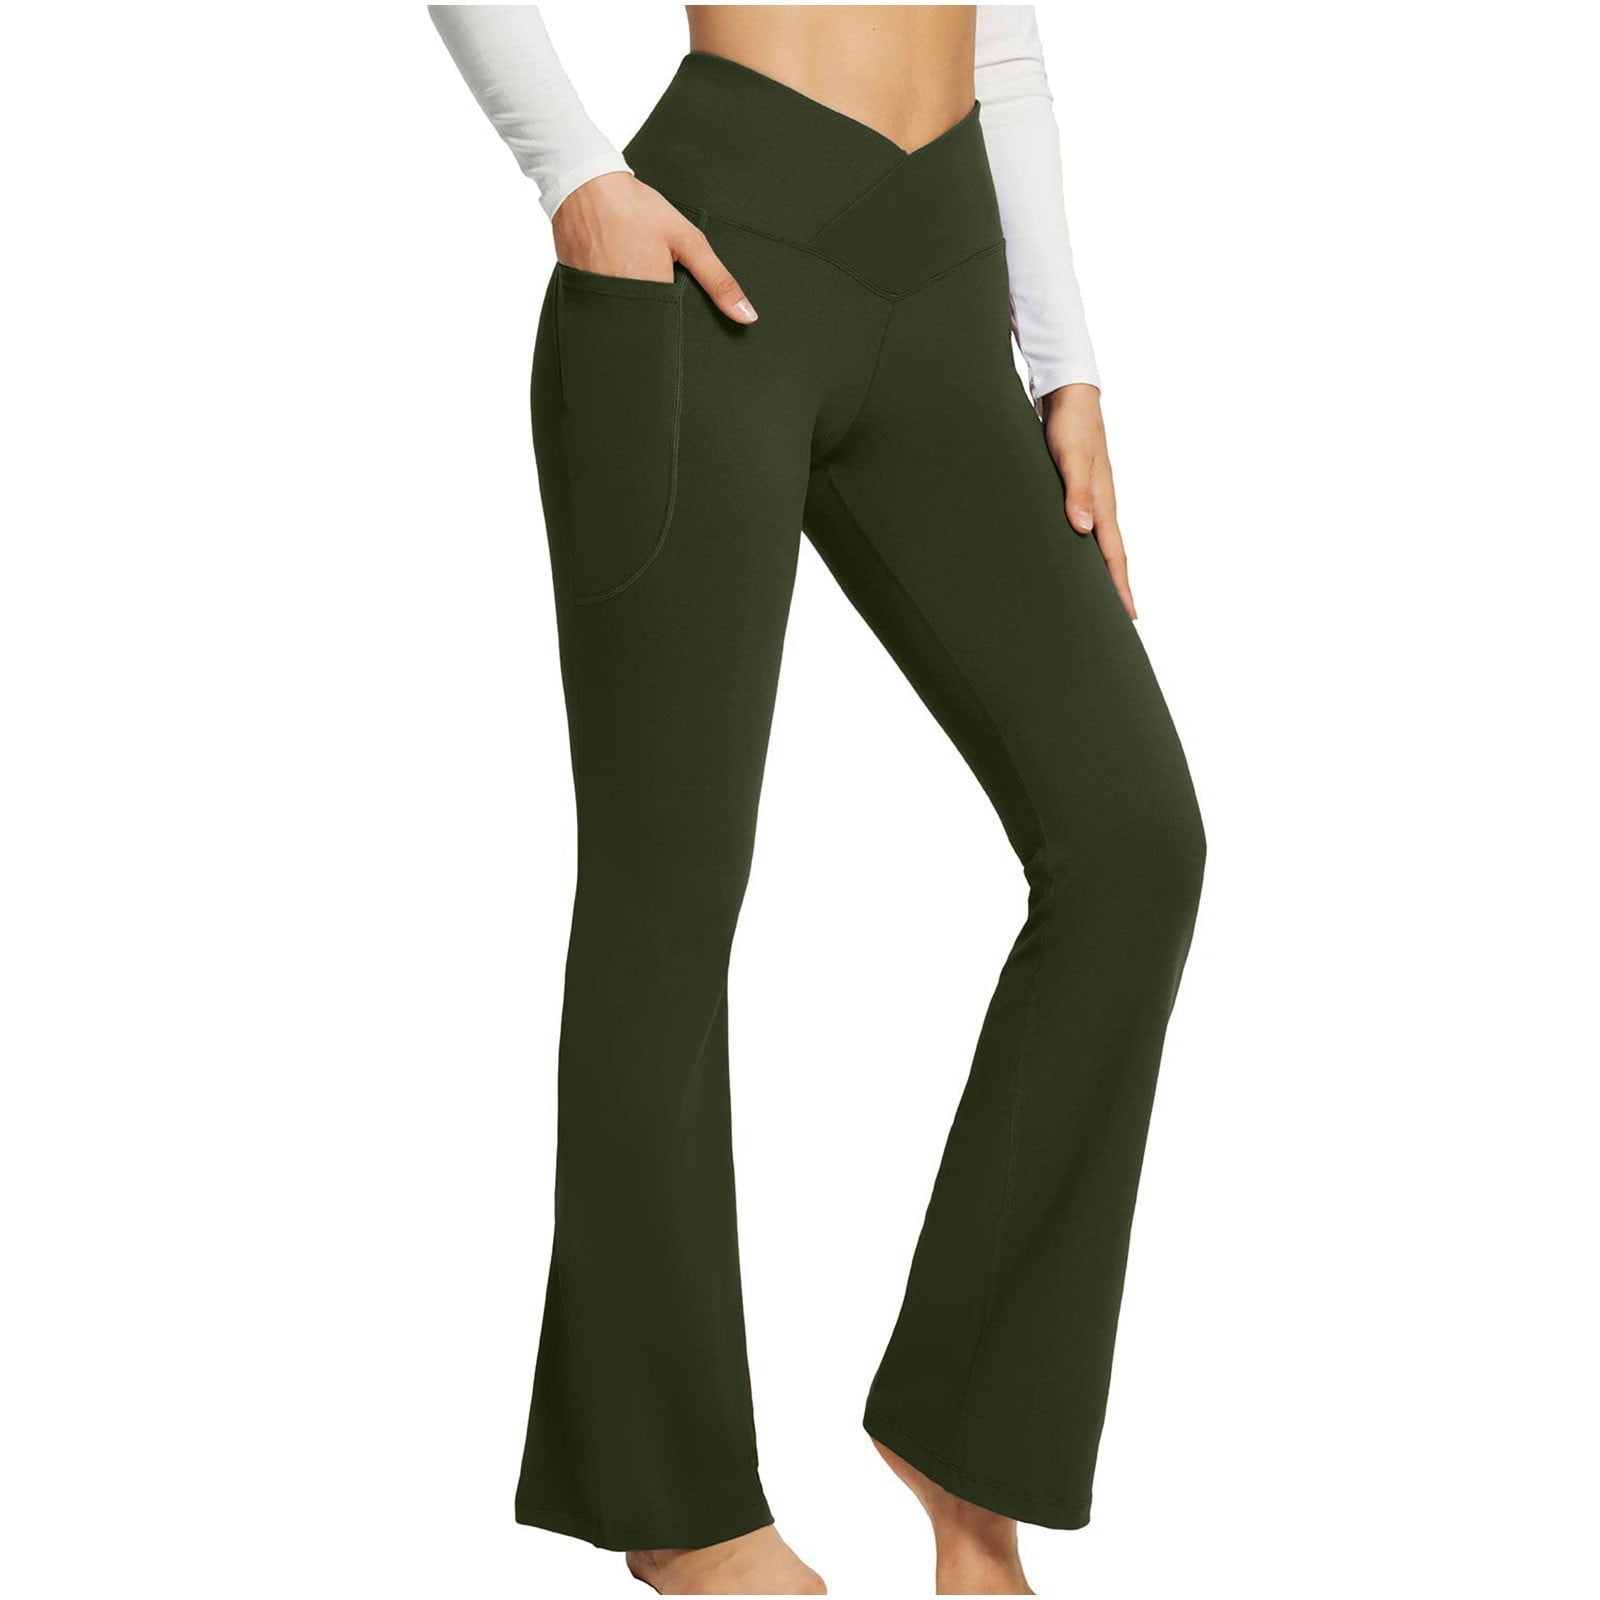 Up 50% off! Flare Leggings, Womens Dress Pants, Womens Workout